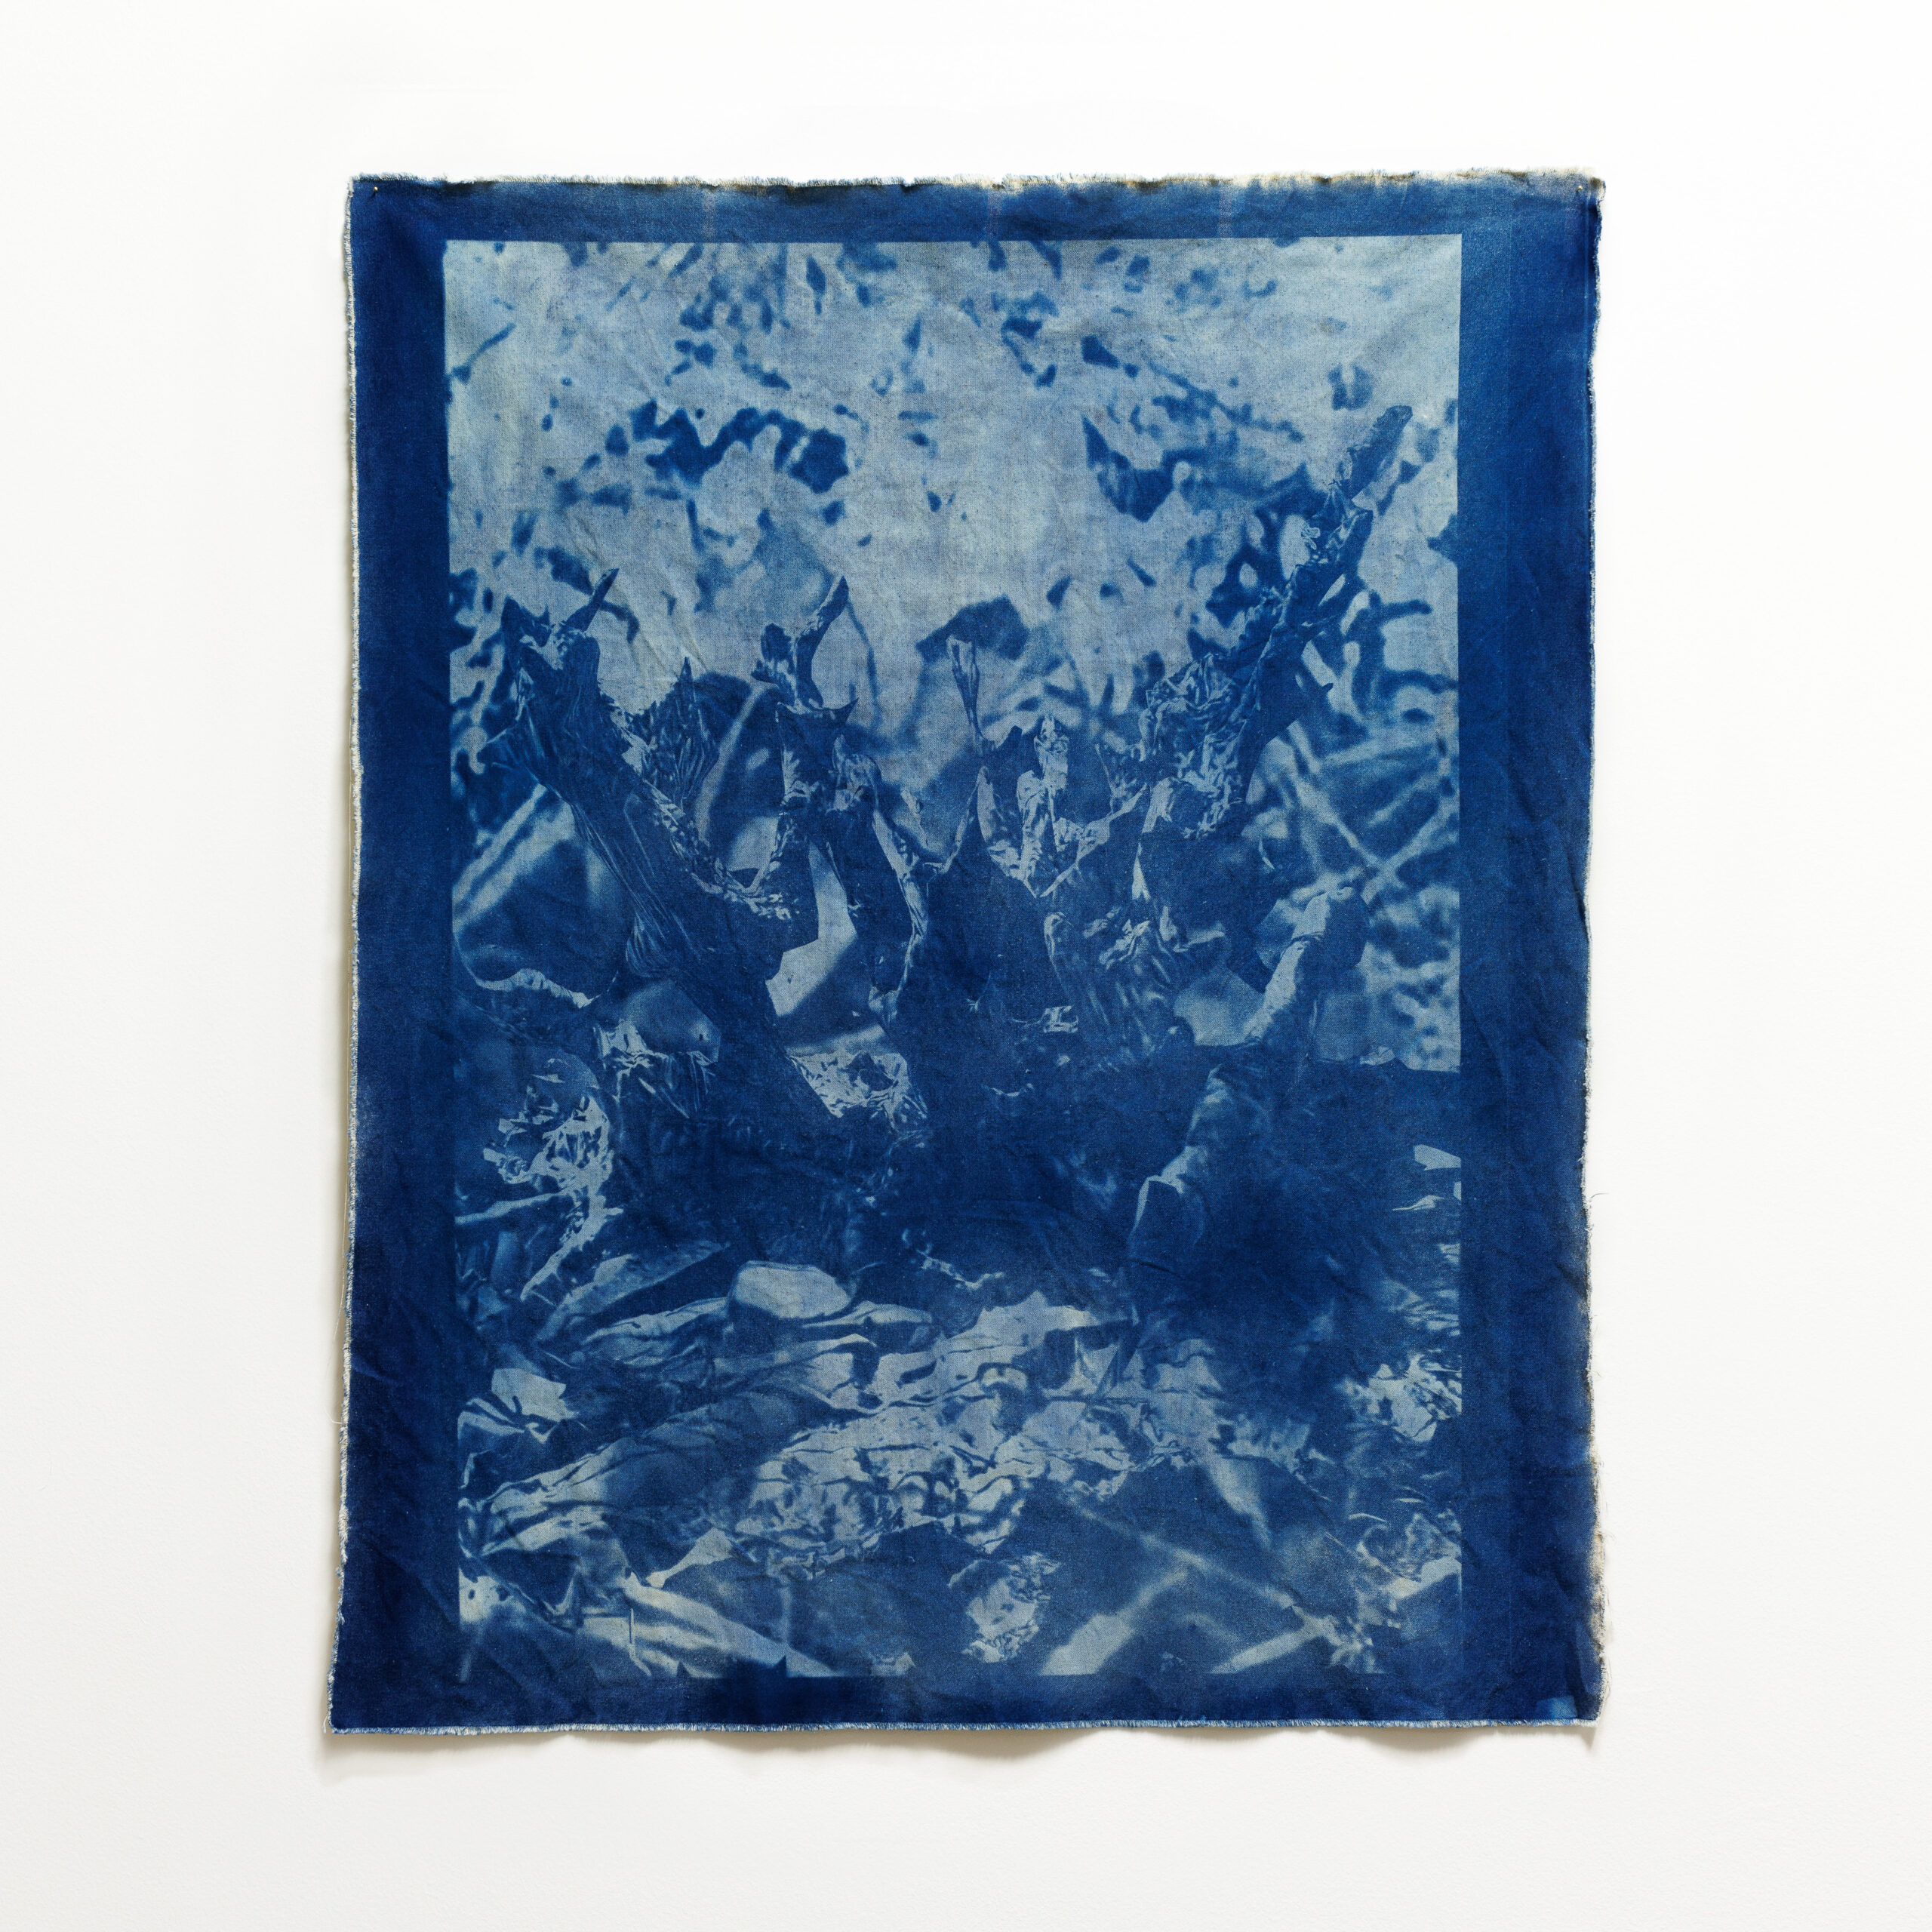 The-Patch-Ruby-Red-Saltbush-Cyanotype-on-canvas-96-x-67-cm-square-edit-small